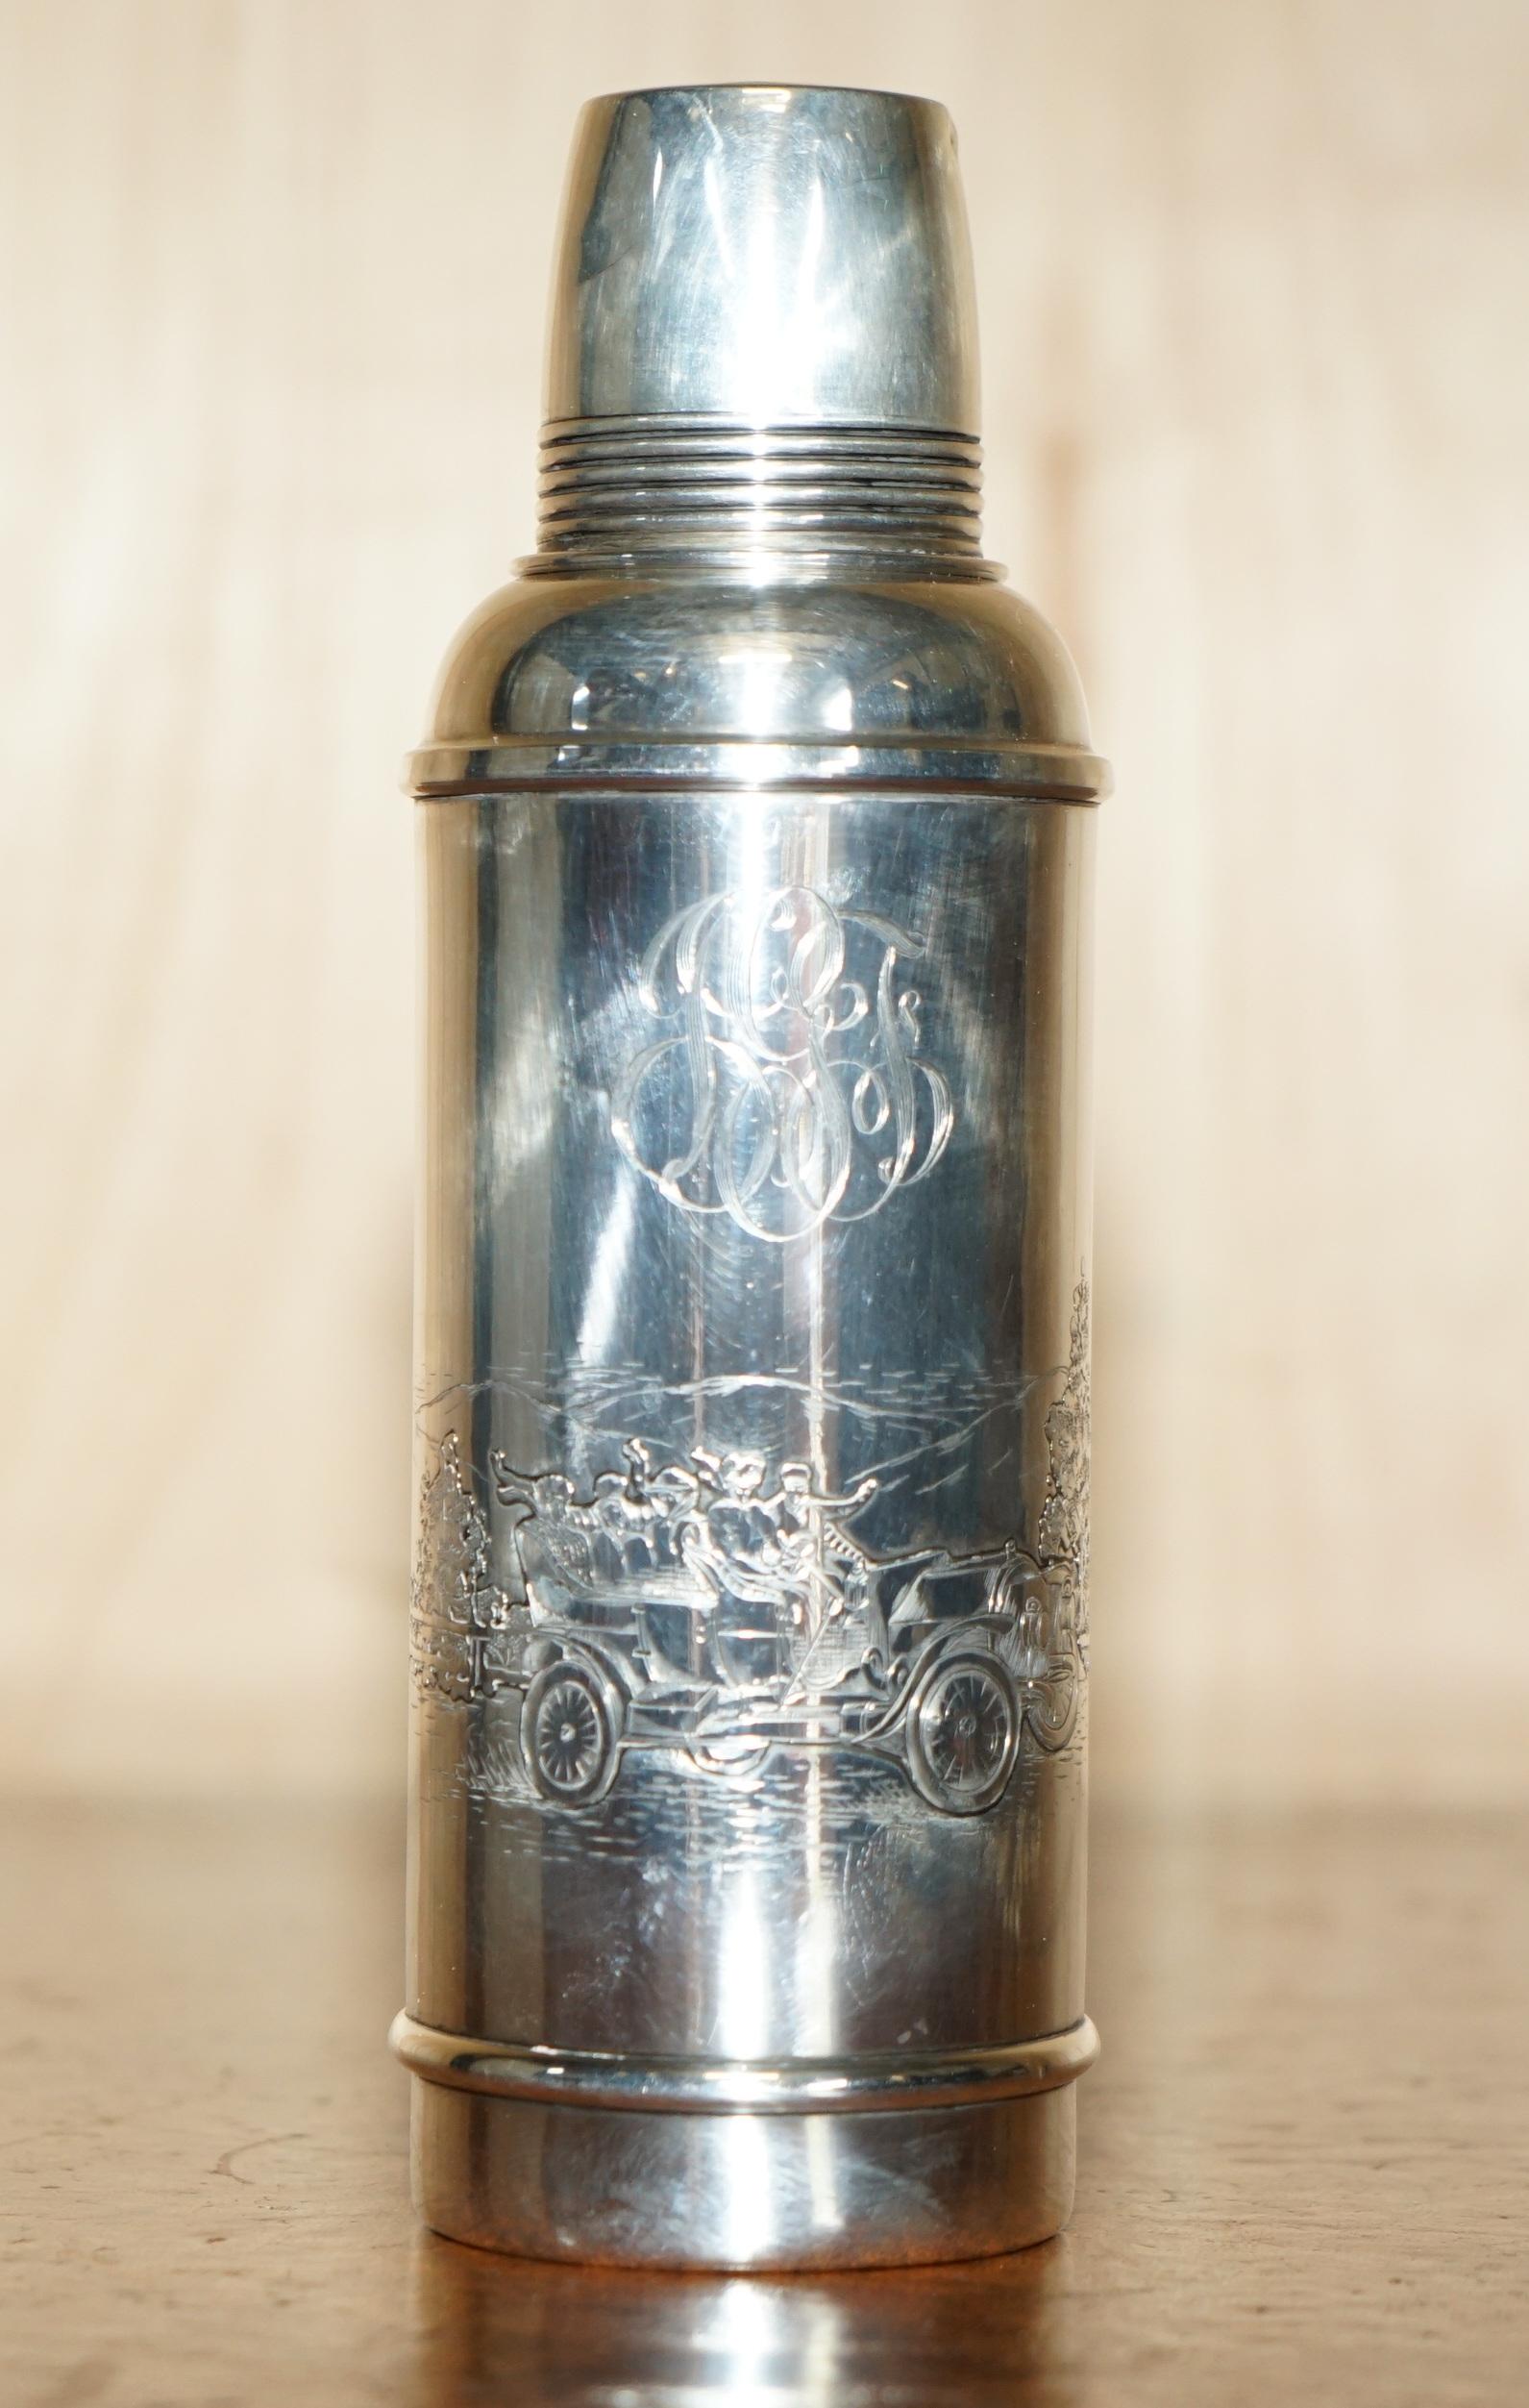 Royal House Antiques

Royal House Antiques is delighted to offer for sale this super rare antique circa 1910 sterling silver flask with embossed from depicting people driving in the countryside in a racing car

A good looking and well made piece, I